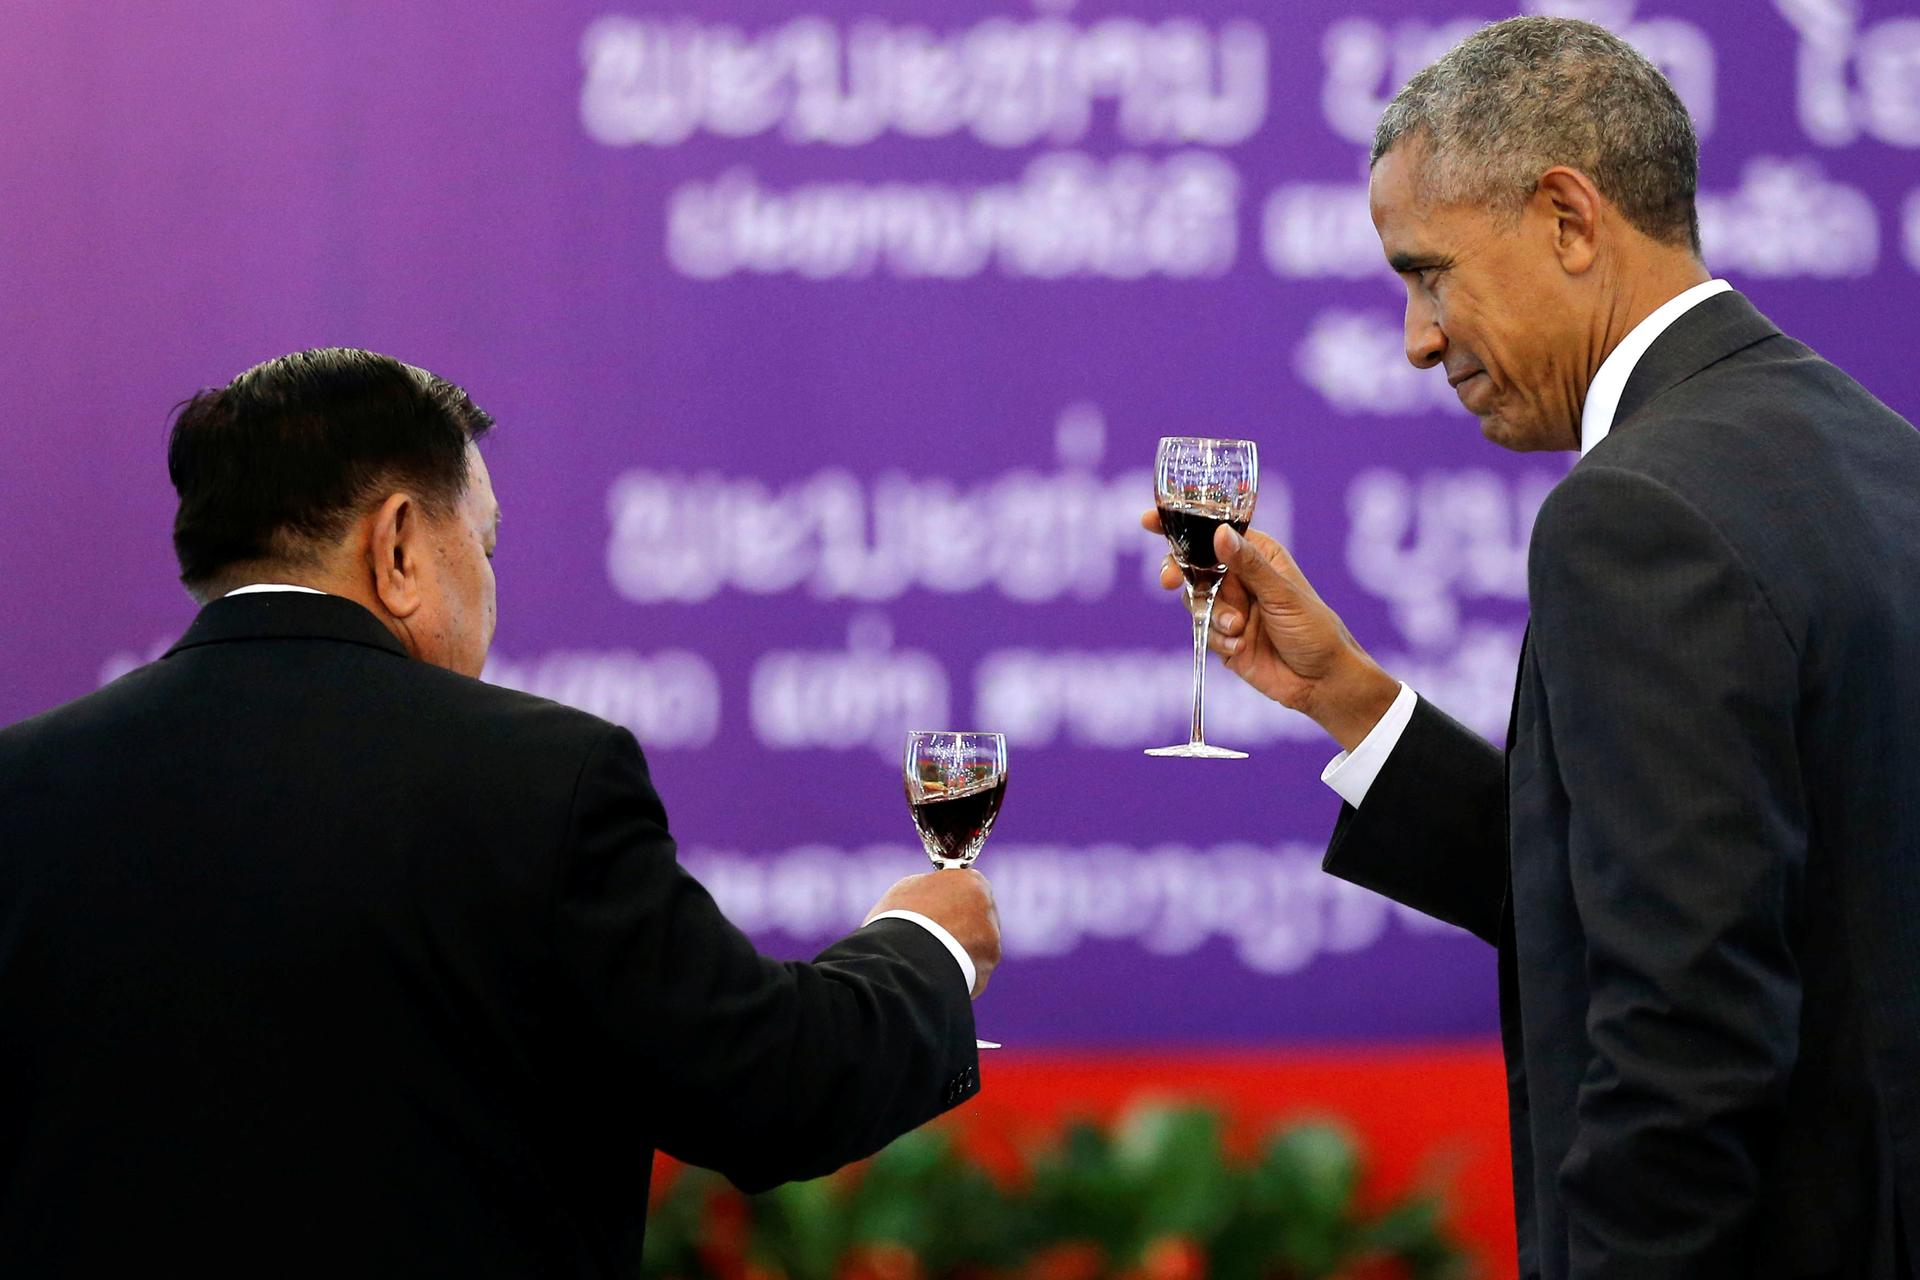 Laos President Bounnhang Vorachith and U.S. President Barack Obama share a toast at a luncheon following their bilateral meeting, alongside the ASEAN Summit, at the Presidential Palace in Vientiane, Laos September 6, 2016.